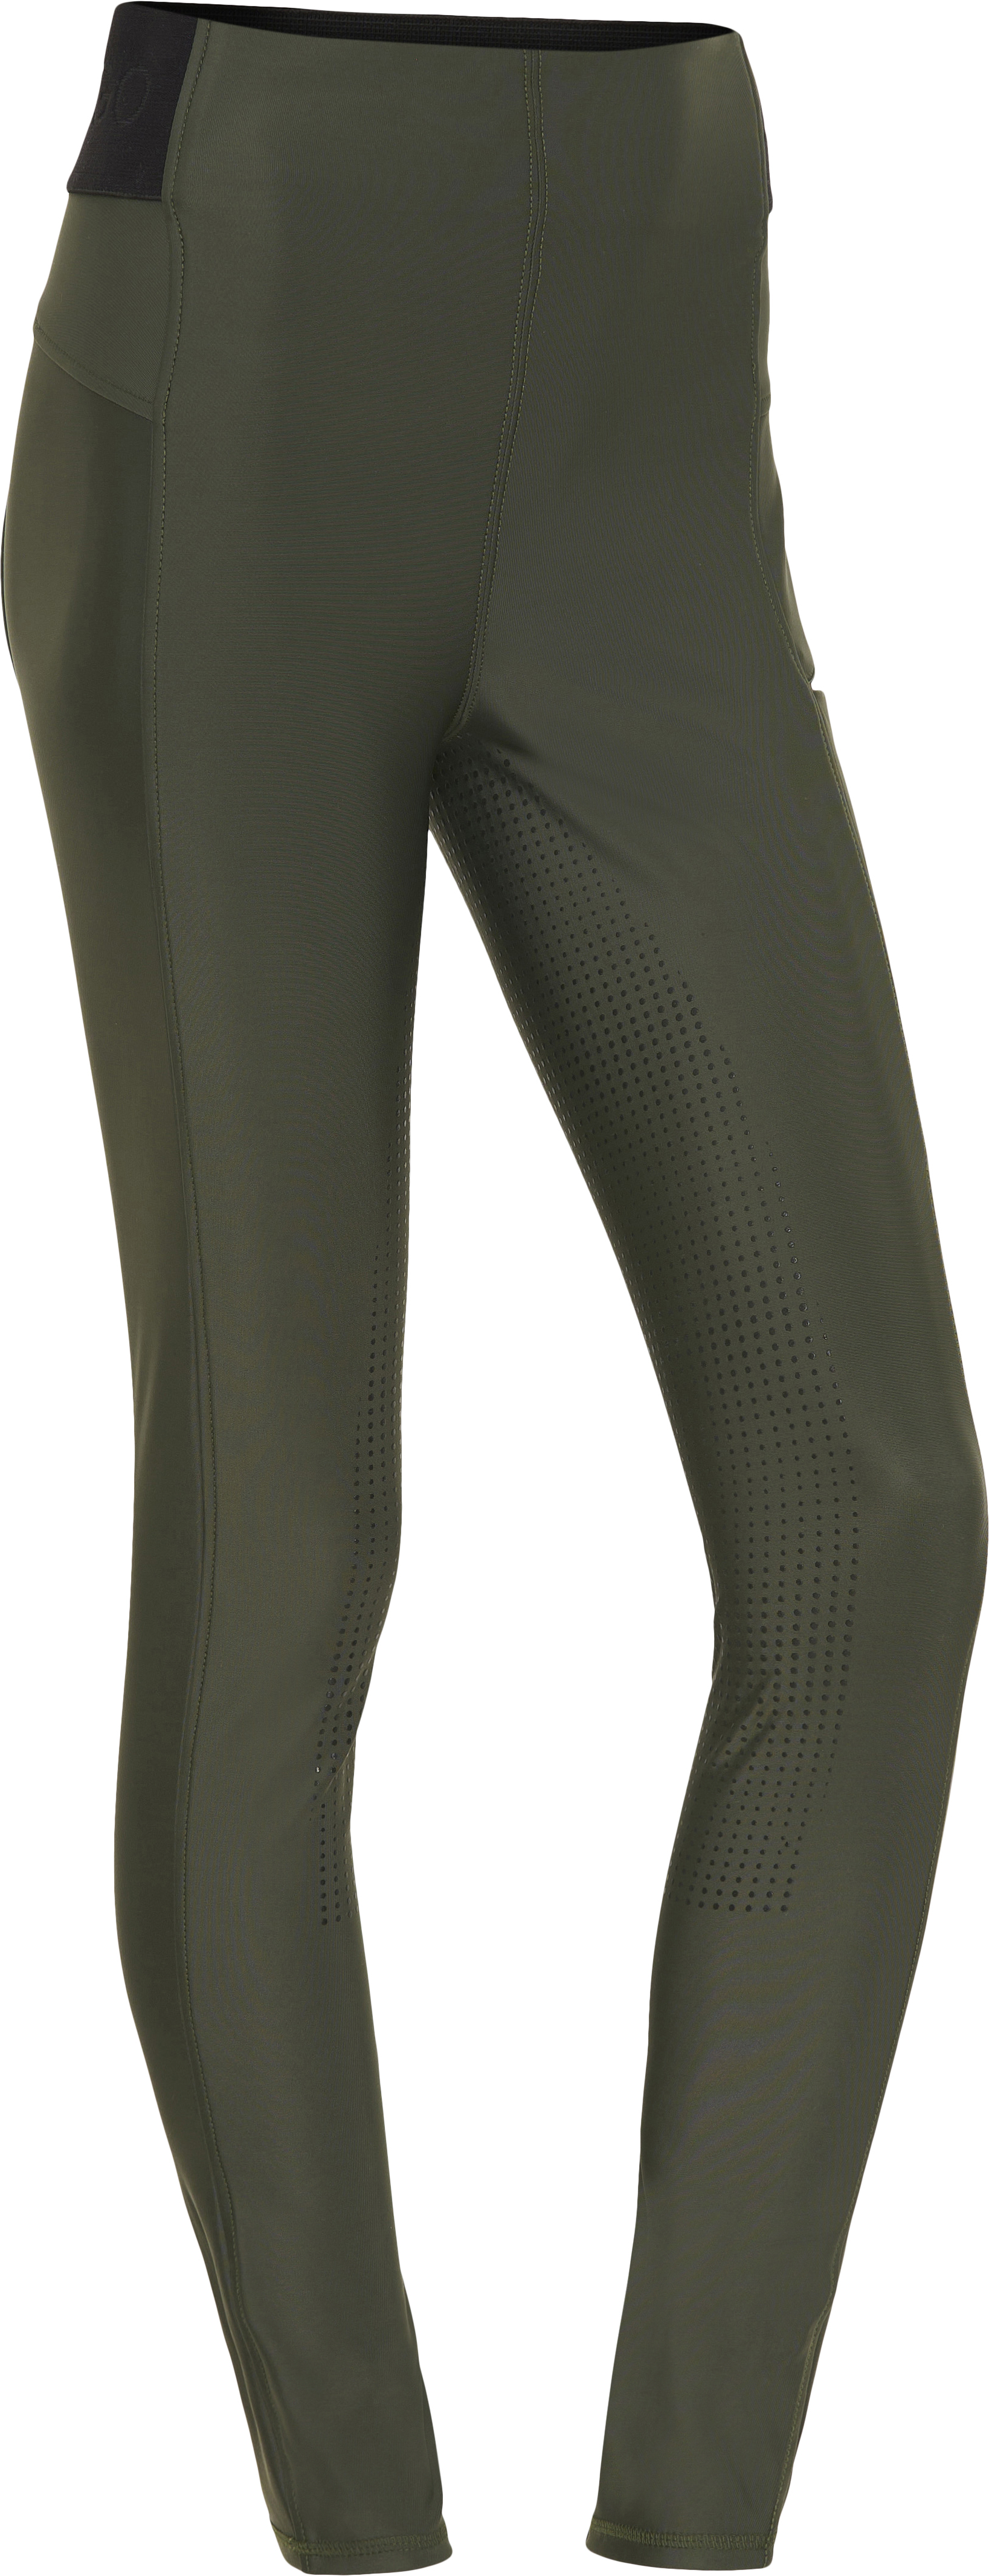 CATAGO Aroy Fullgrip High Waisted Tights Forest (4XL), Catago